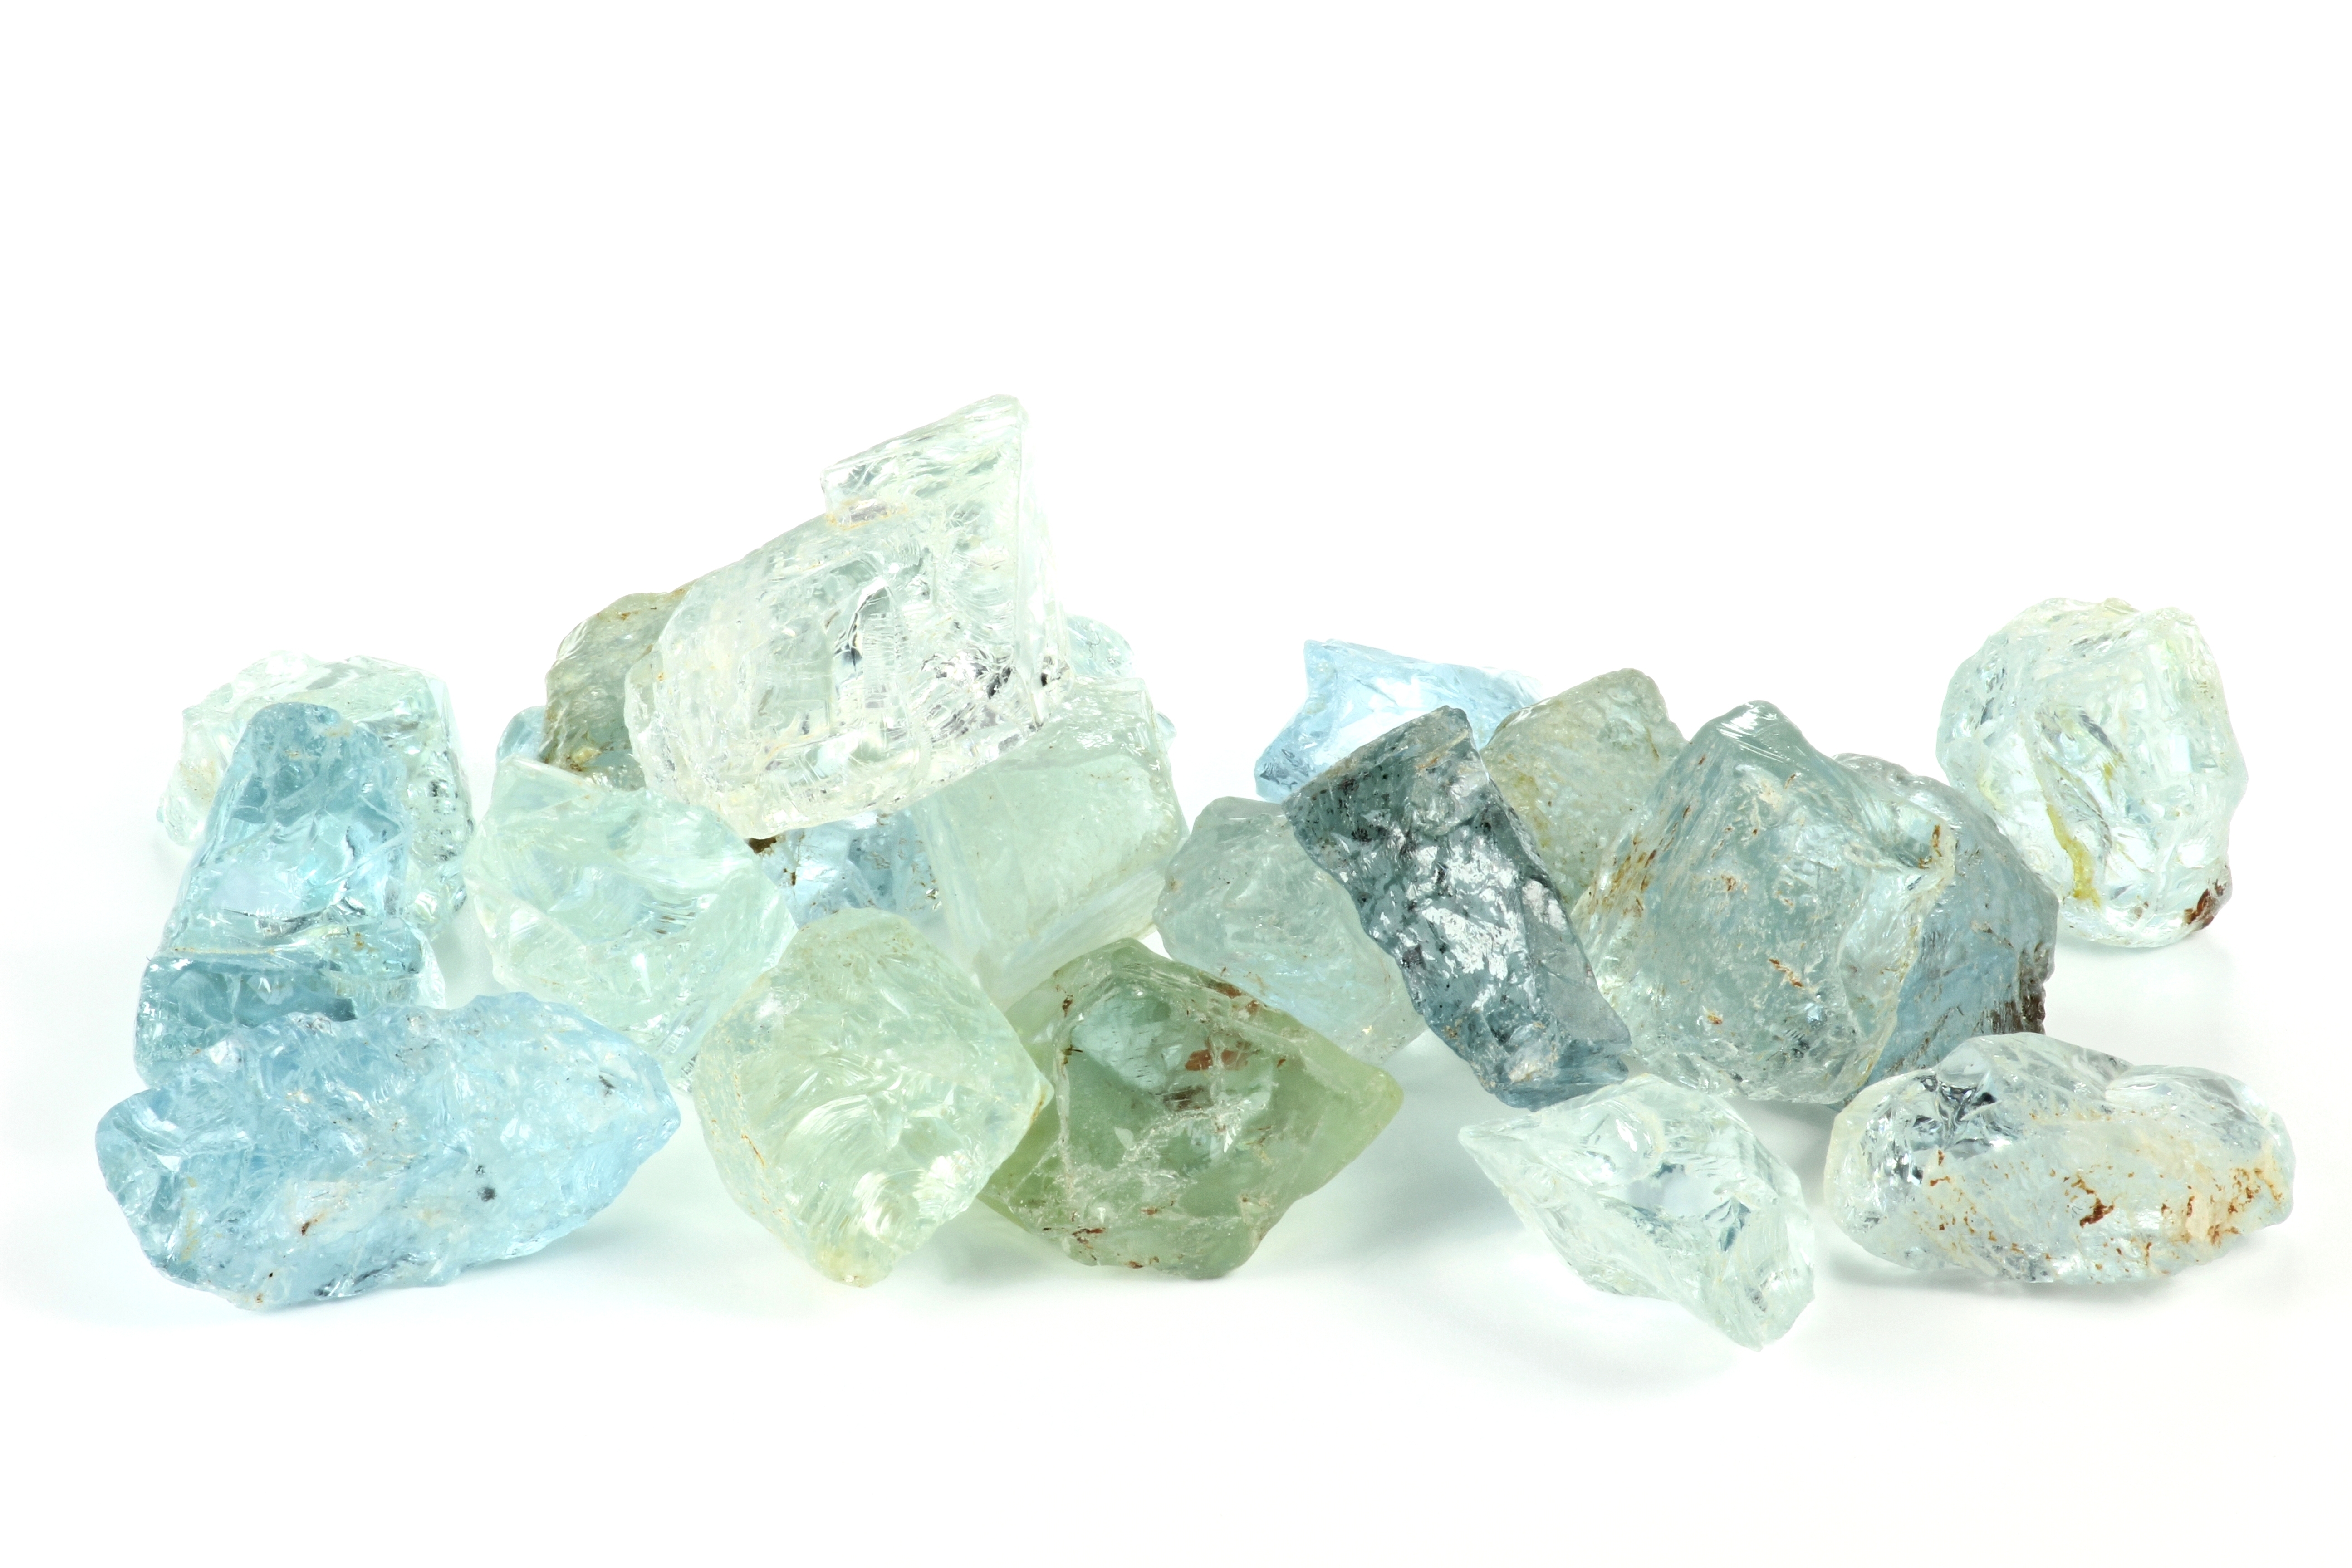 Multiple pieces of Aquamarine on a white background